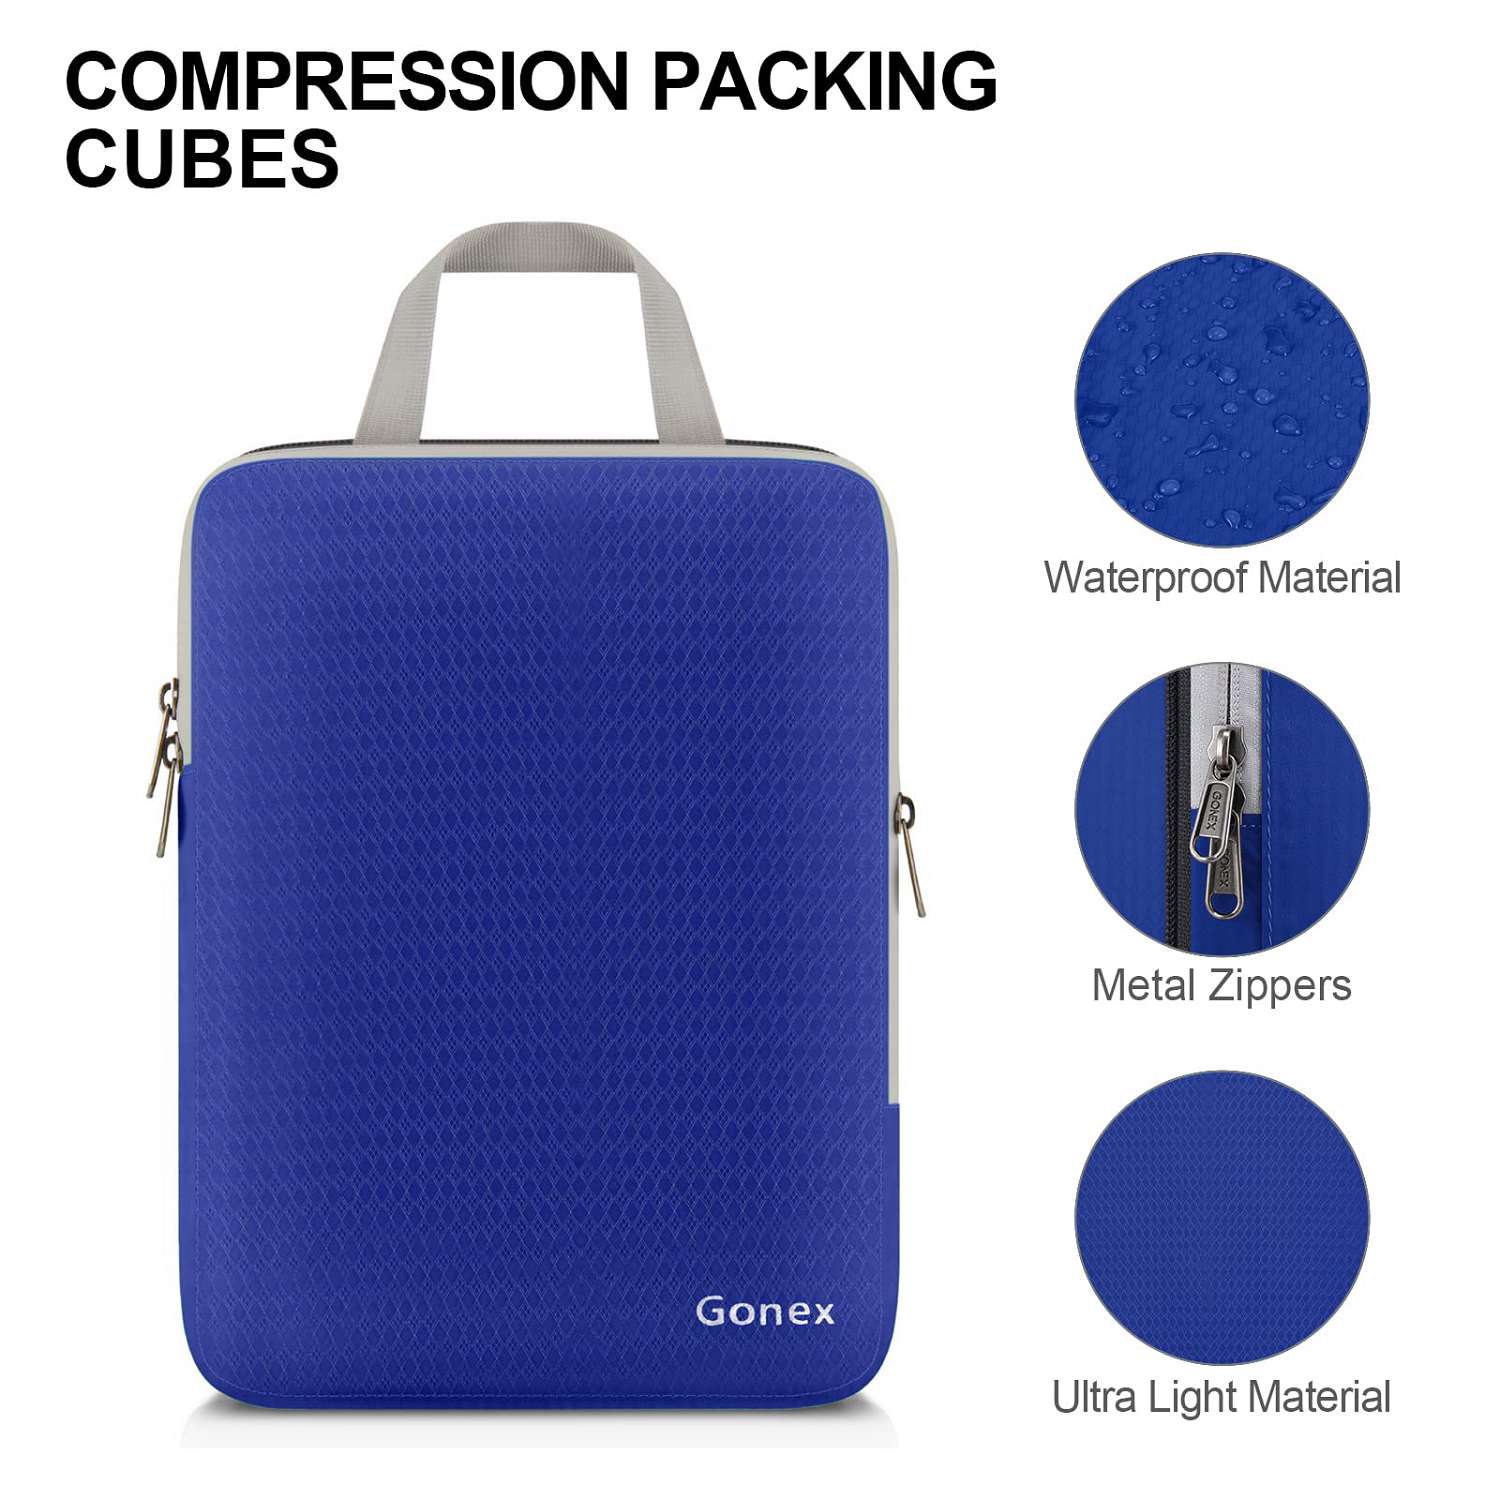 compression packing cubes best